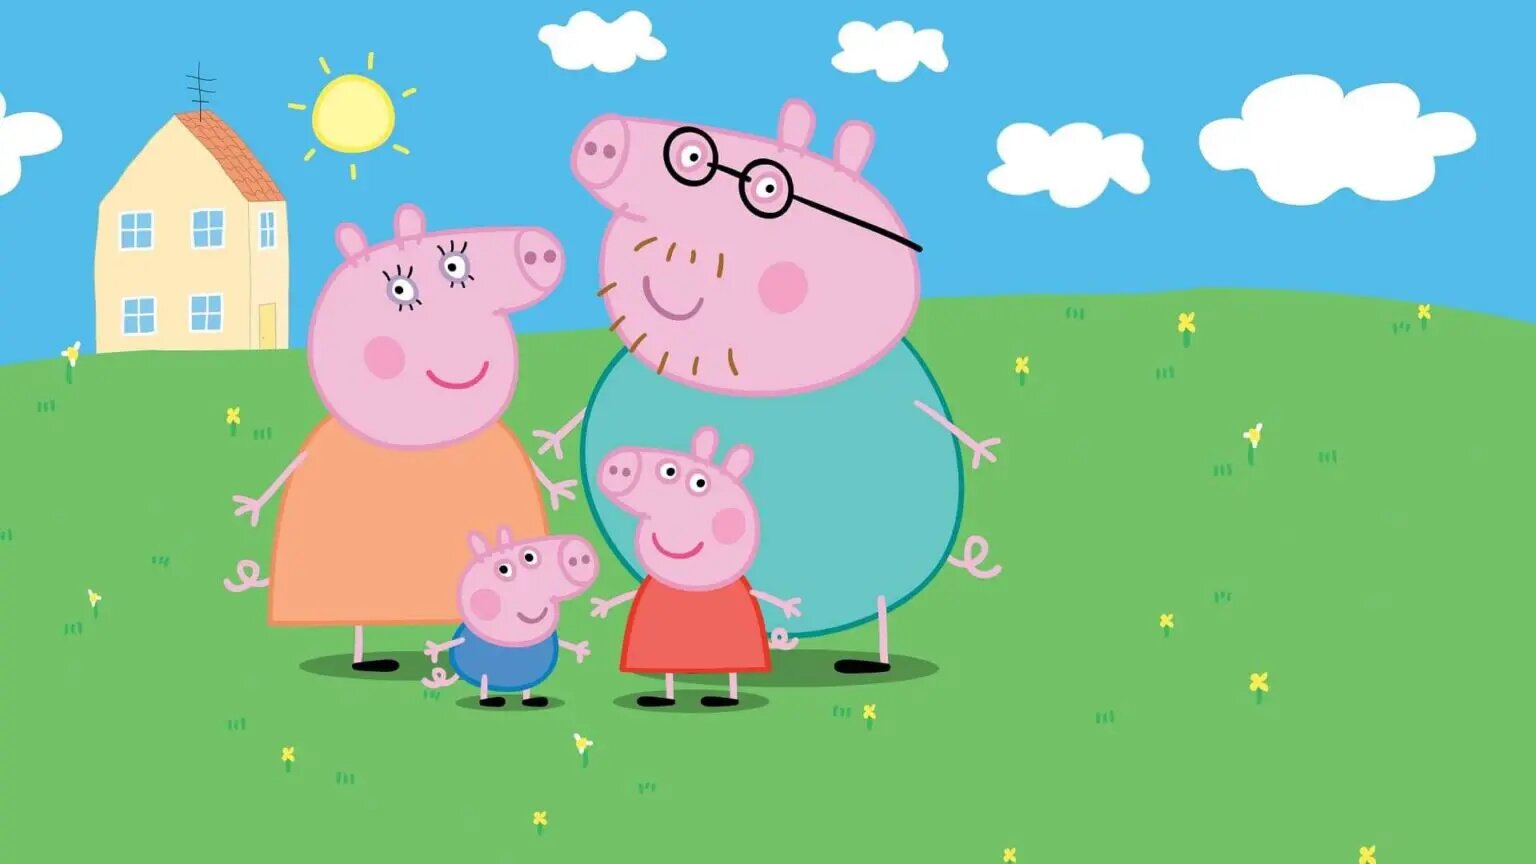 pic of peppa pig house wallpaper